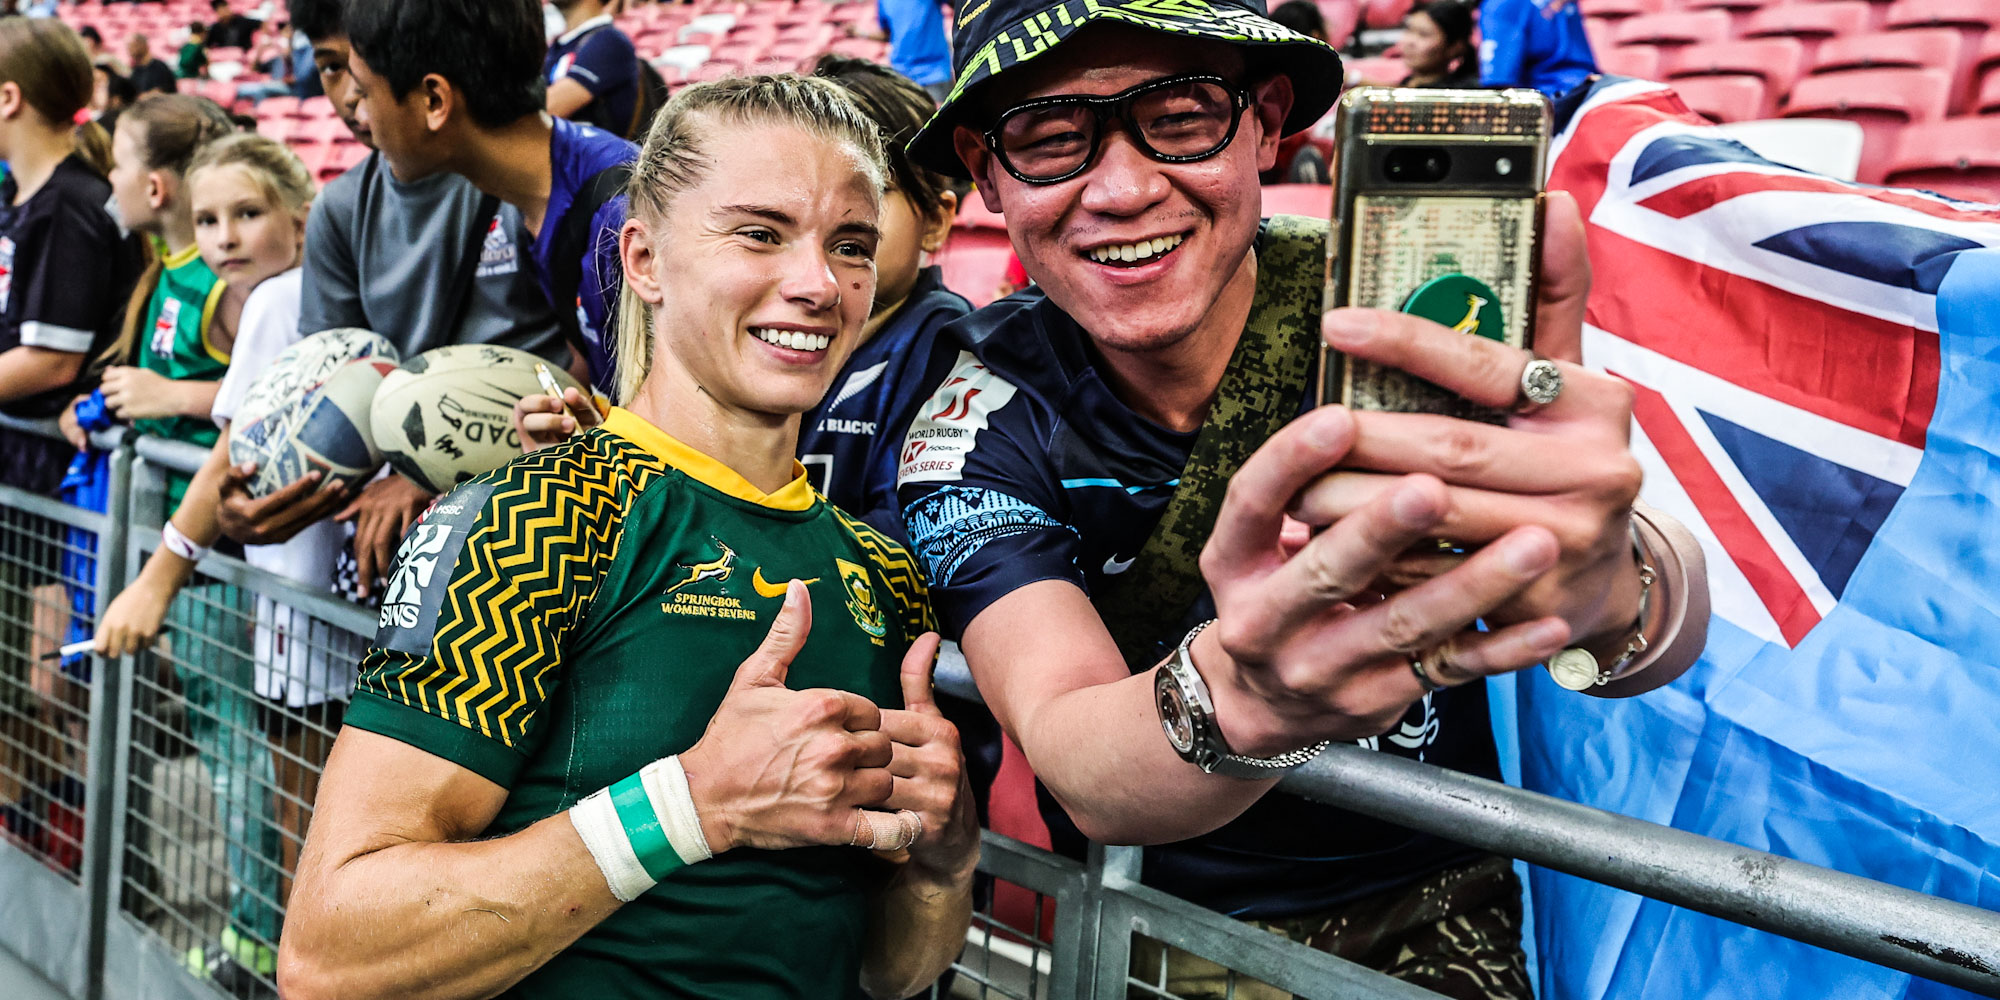 Nadine Roos with a South African fan in the stands in Singapore after the final match.